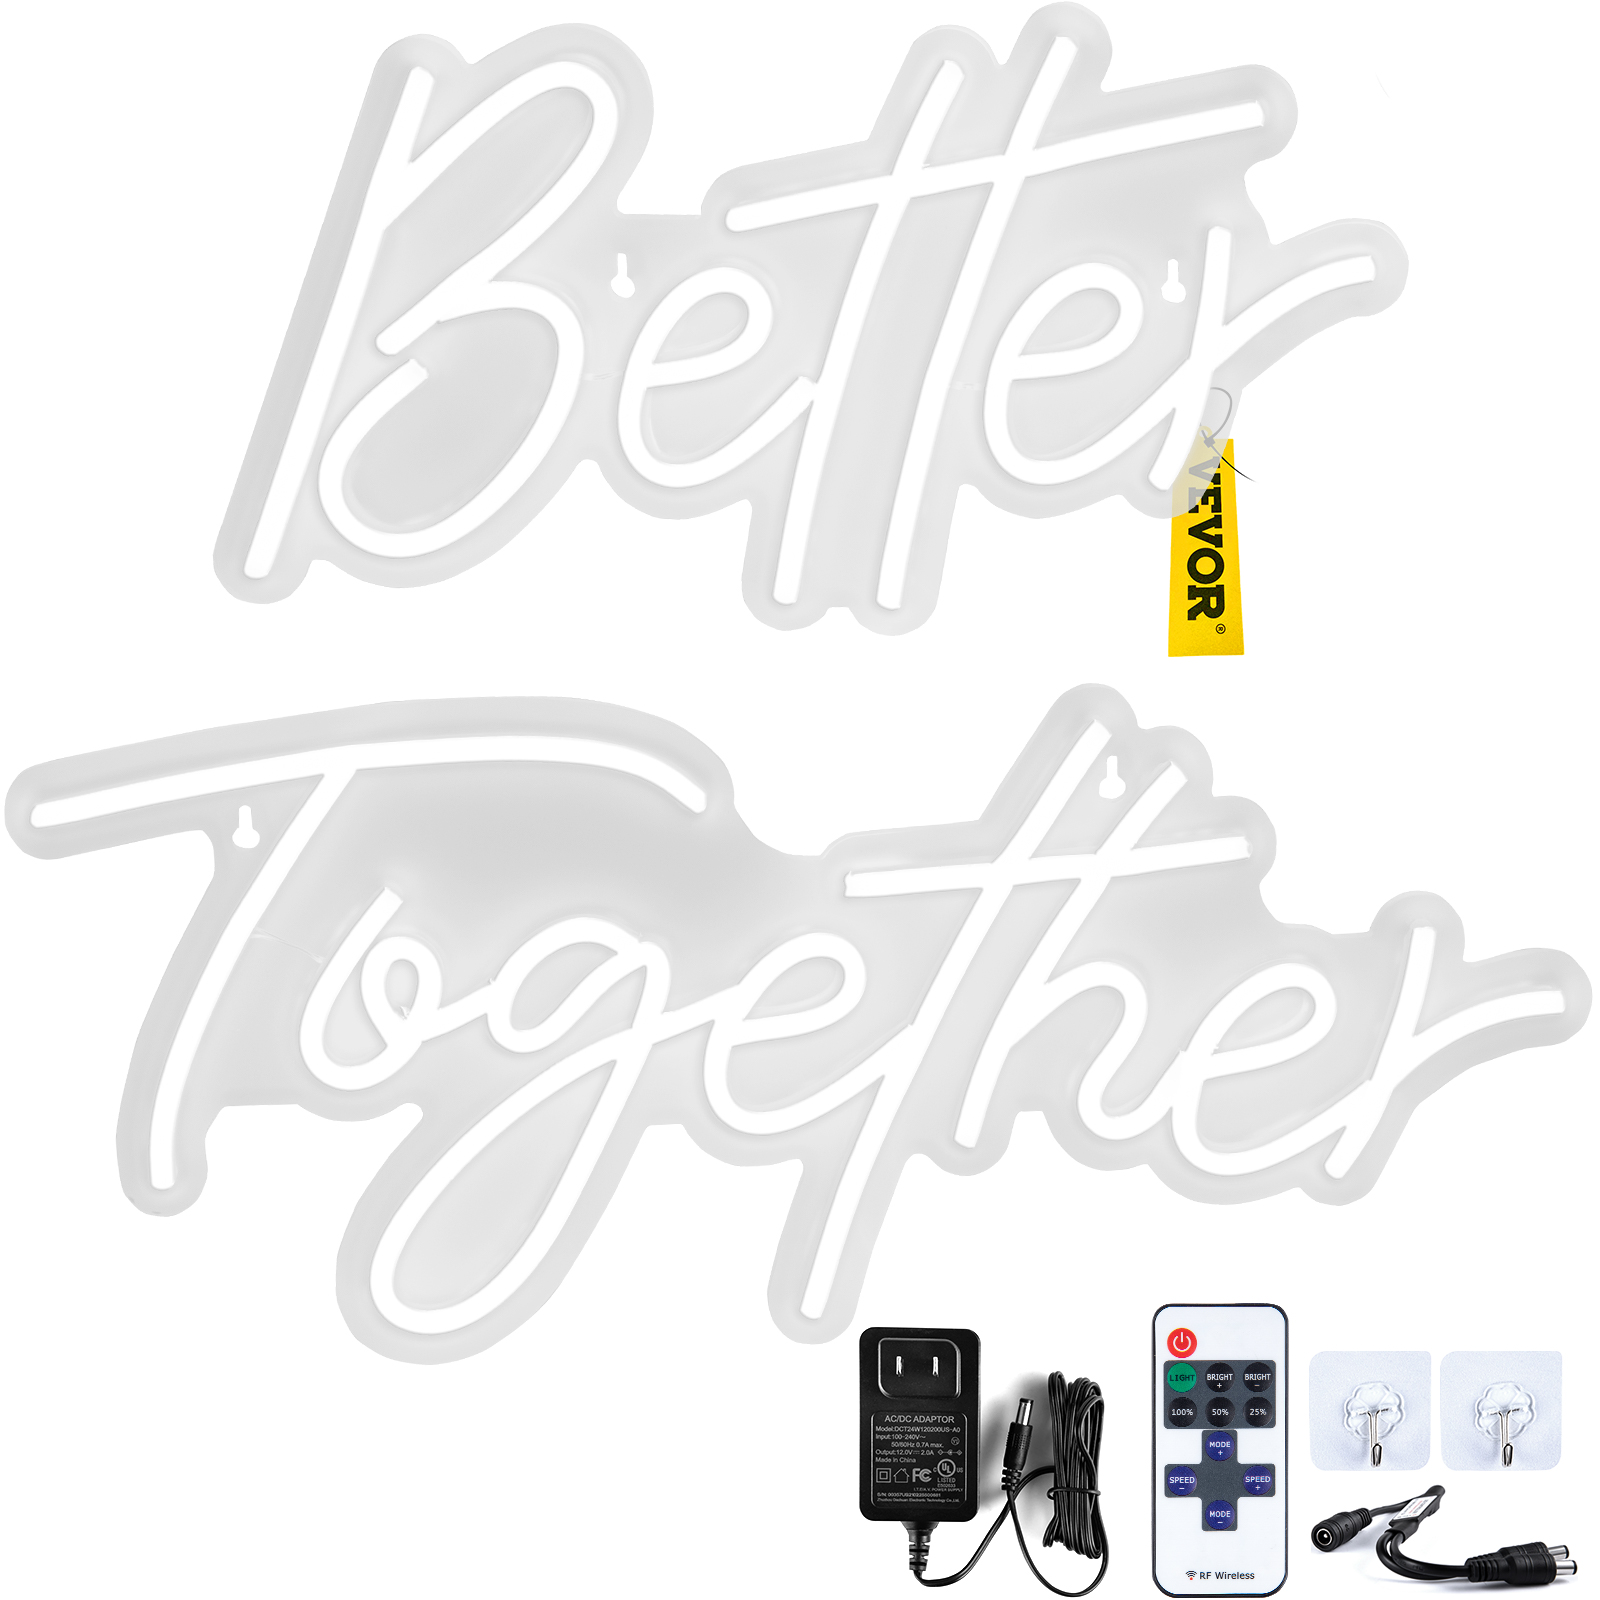 VEVOR Neon Sign Better Together Neon Light Signs 24" x 10" + 17" x 9" Warm White от Vevor Many GEOs